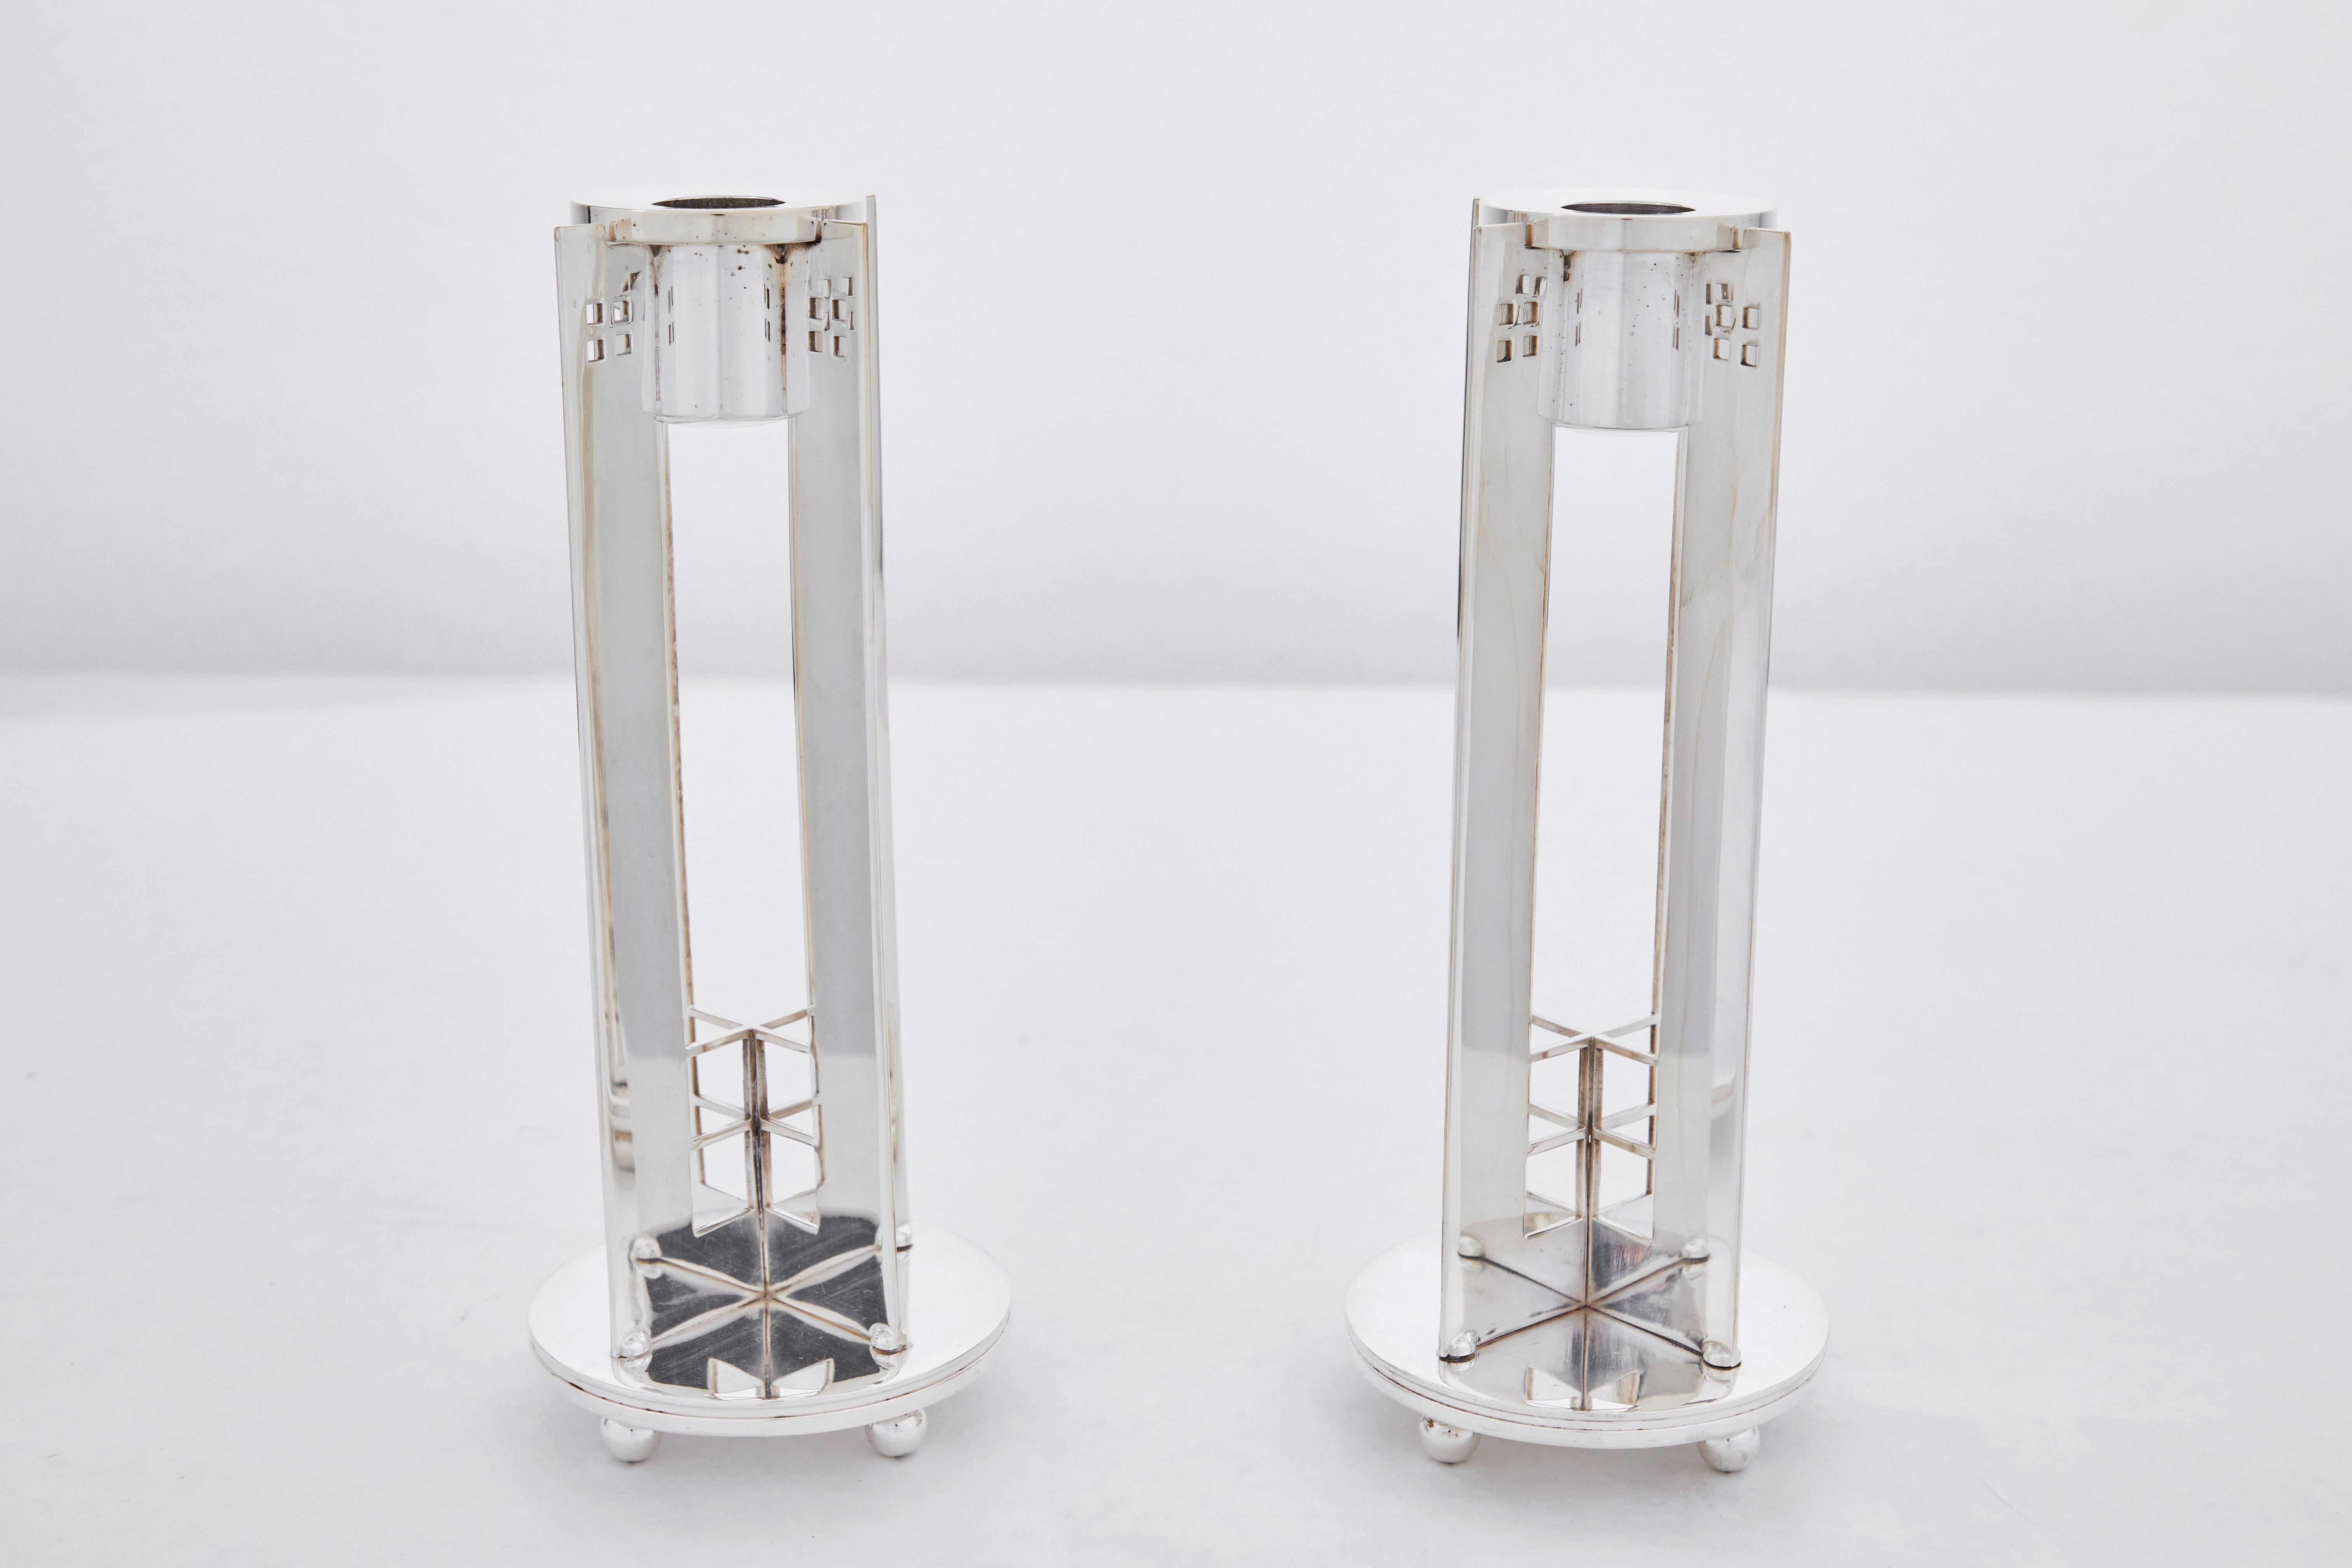 This is a pair of silver plated King Richard candle holders. These sculpturally modernist candle holders were designed by American Architect Richard Meier for Swid Powell. Founded in 1982, Swid Powell produced stylish and utilitarian home decor